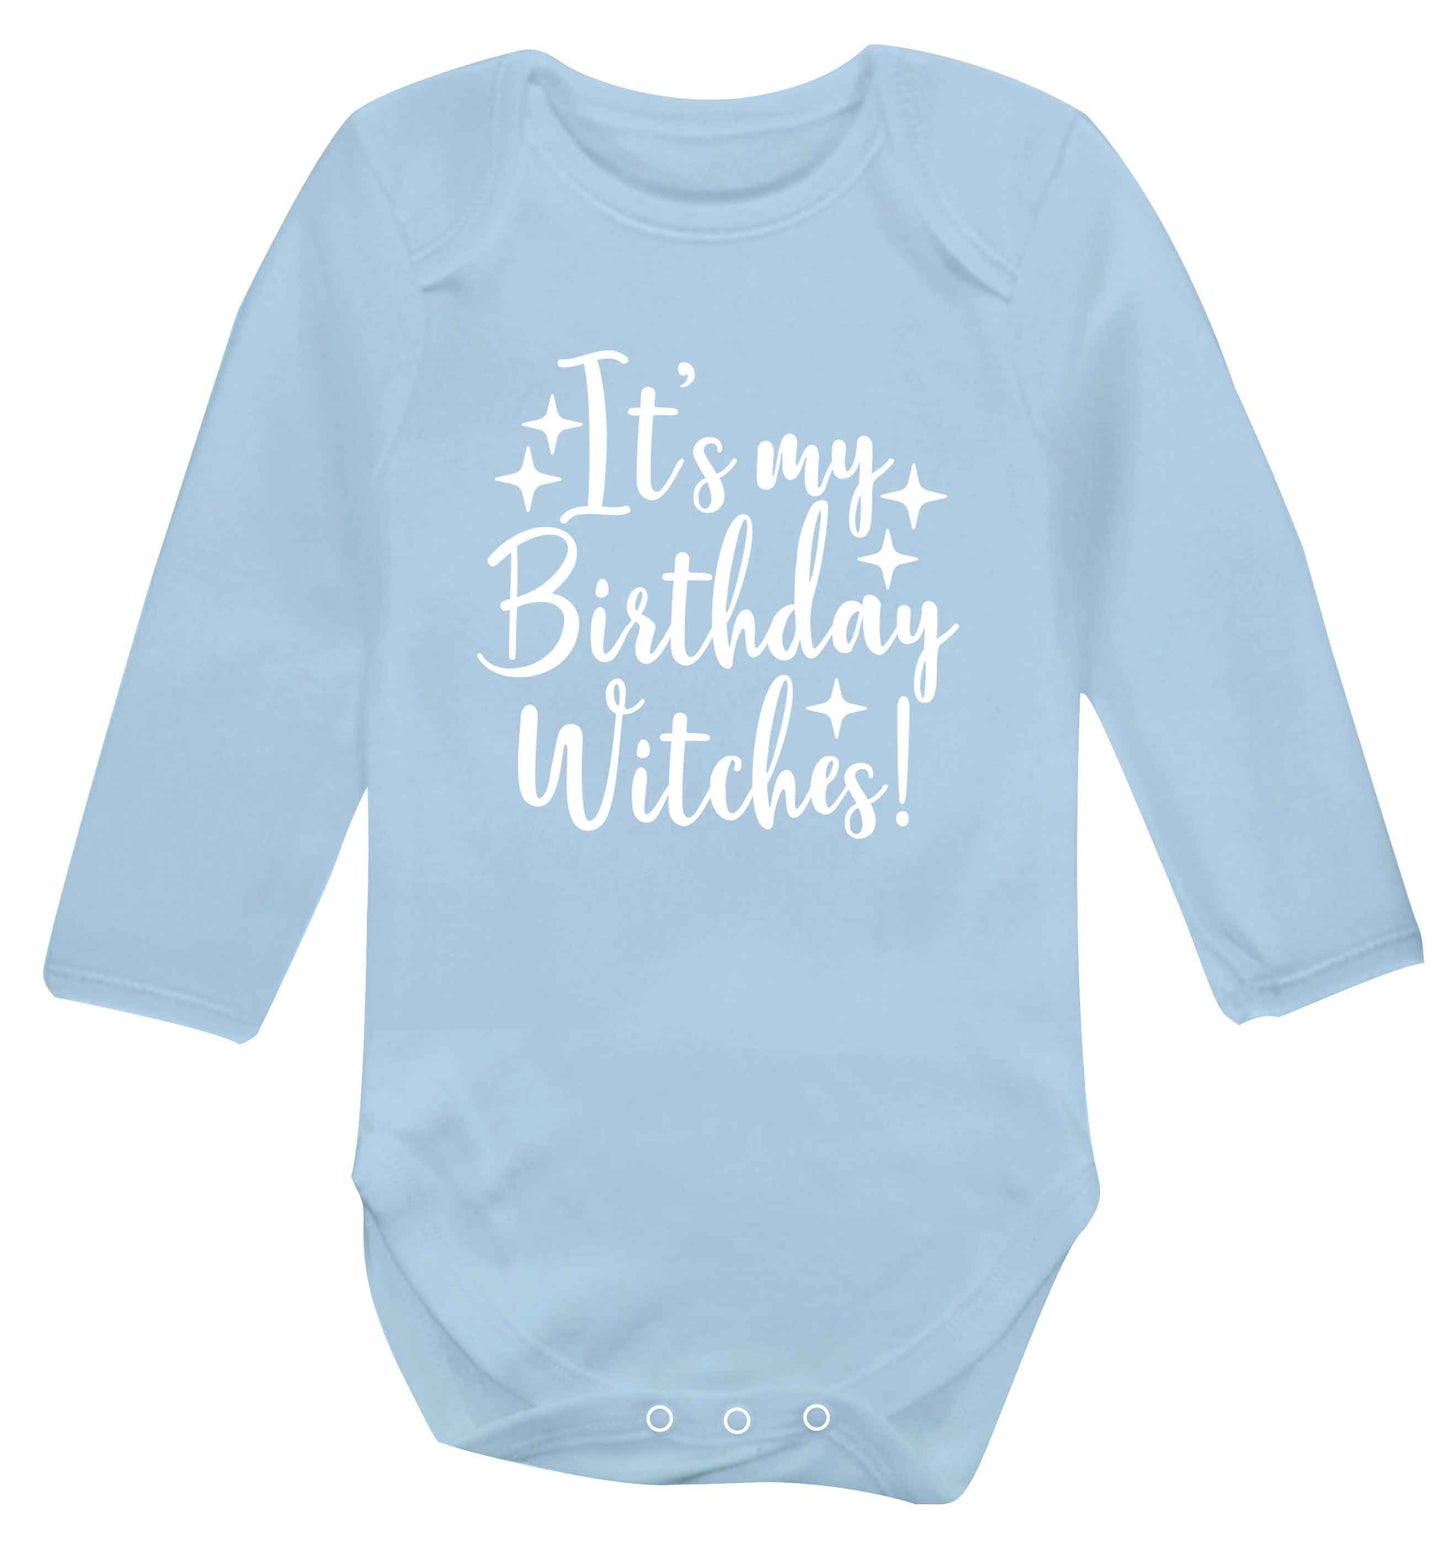 It's my birthday witches!baby vest long sleeved pale blue 6-12 months